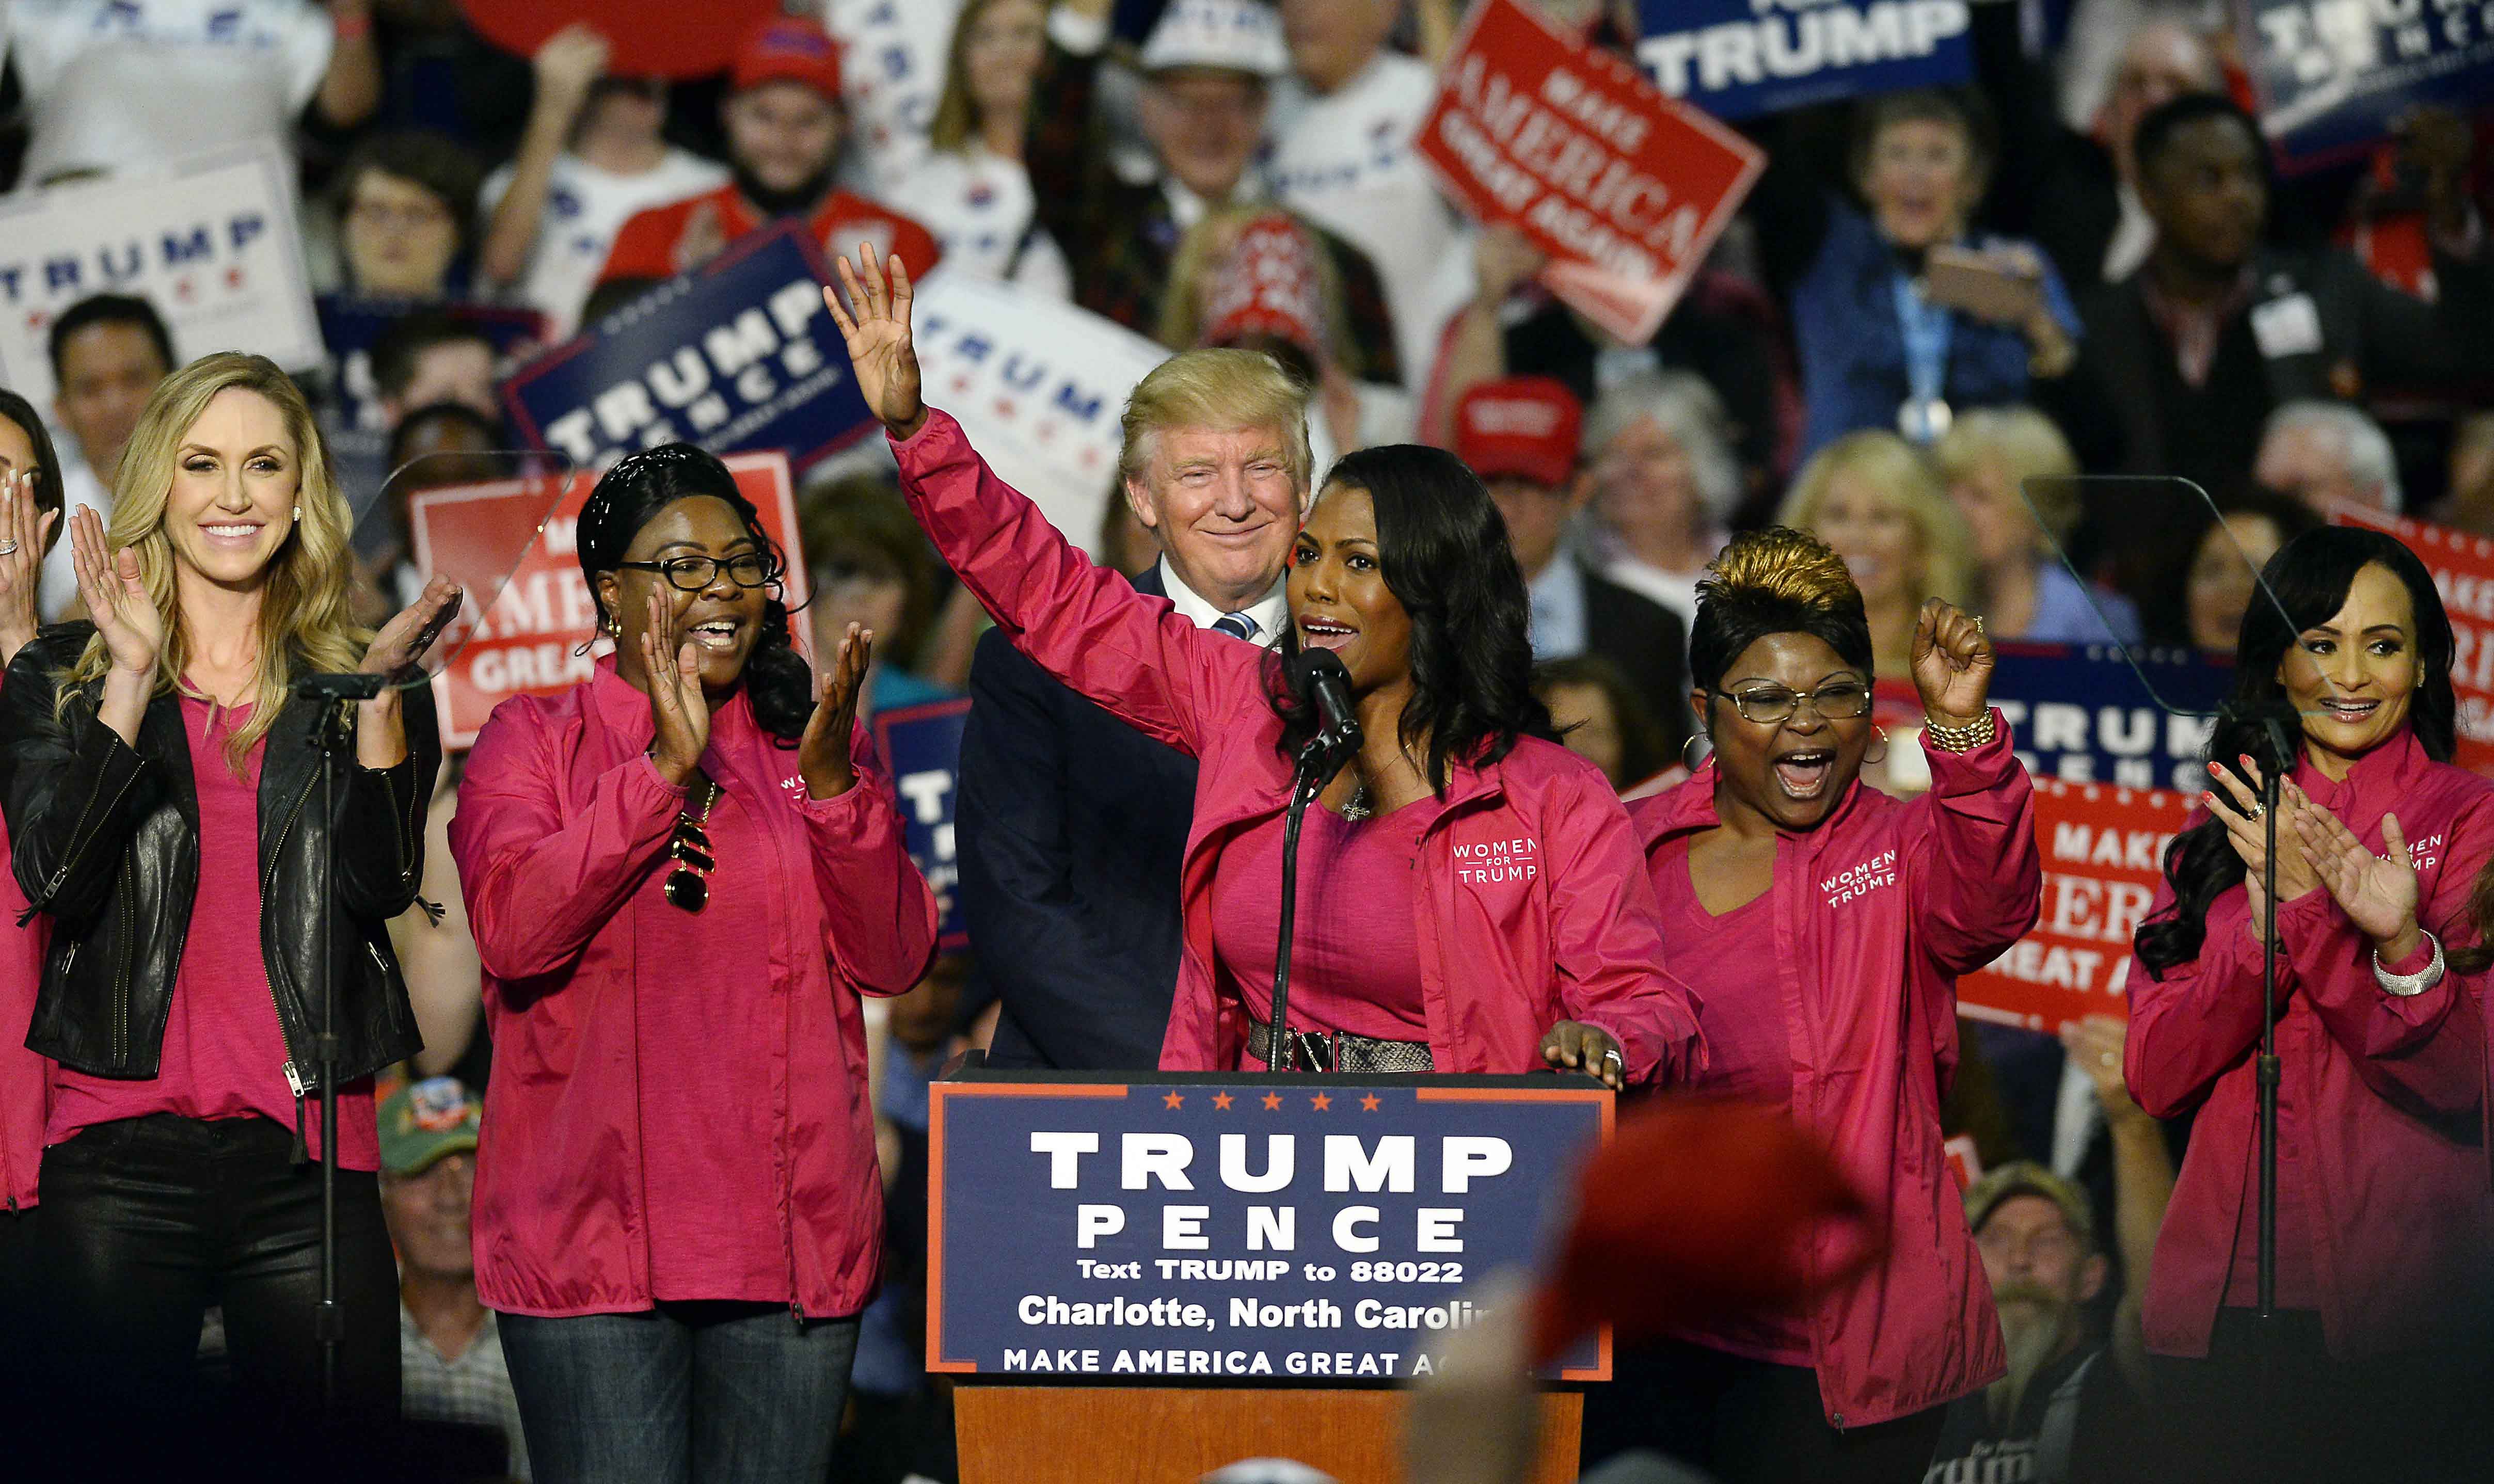 Reality TV personality Omarosa Manigault and other Women for Trump members endorse Republican presidential candidate Donald Trump during a campaign rally at the Charlotte Convention Center in Charlotte, N.C., on Friday, Oct. 14, 2016. (David T. Foster III/Charlotte Observer/TNS)